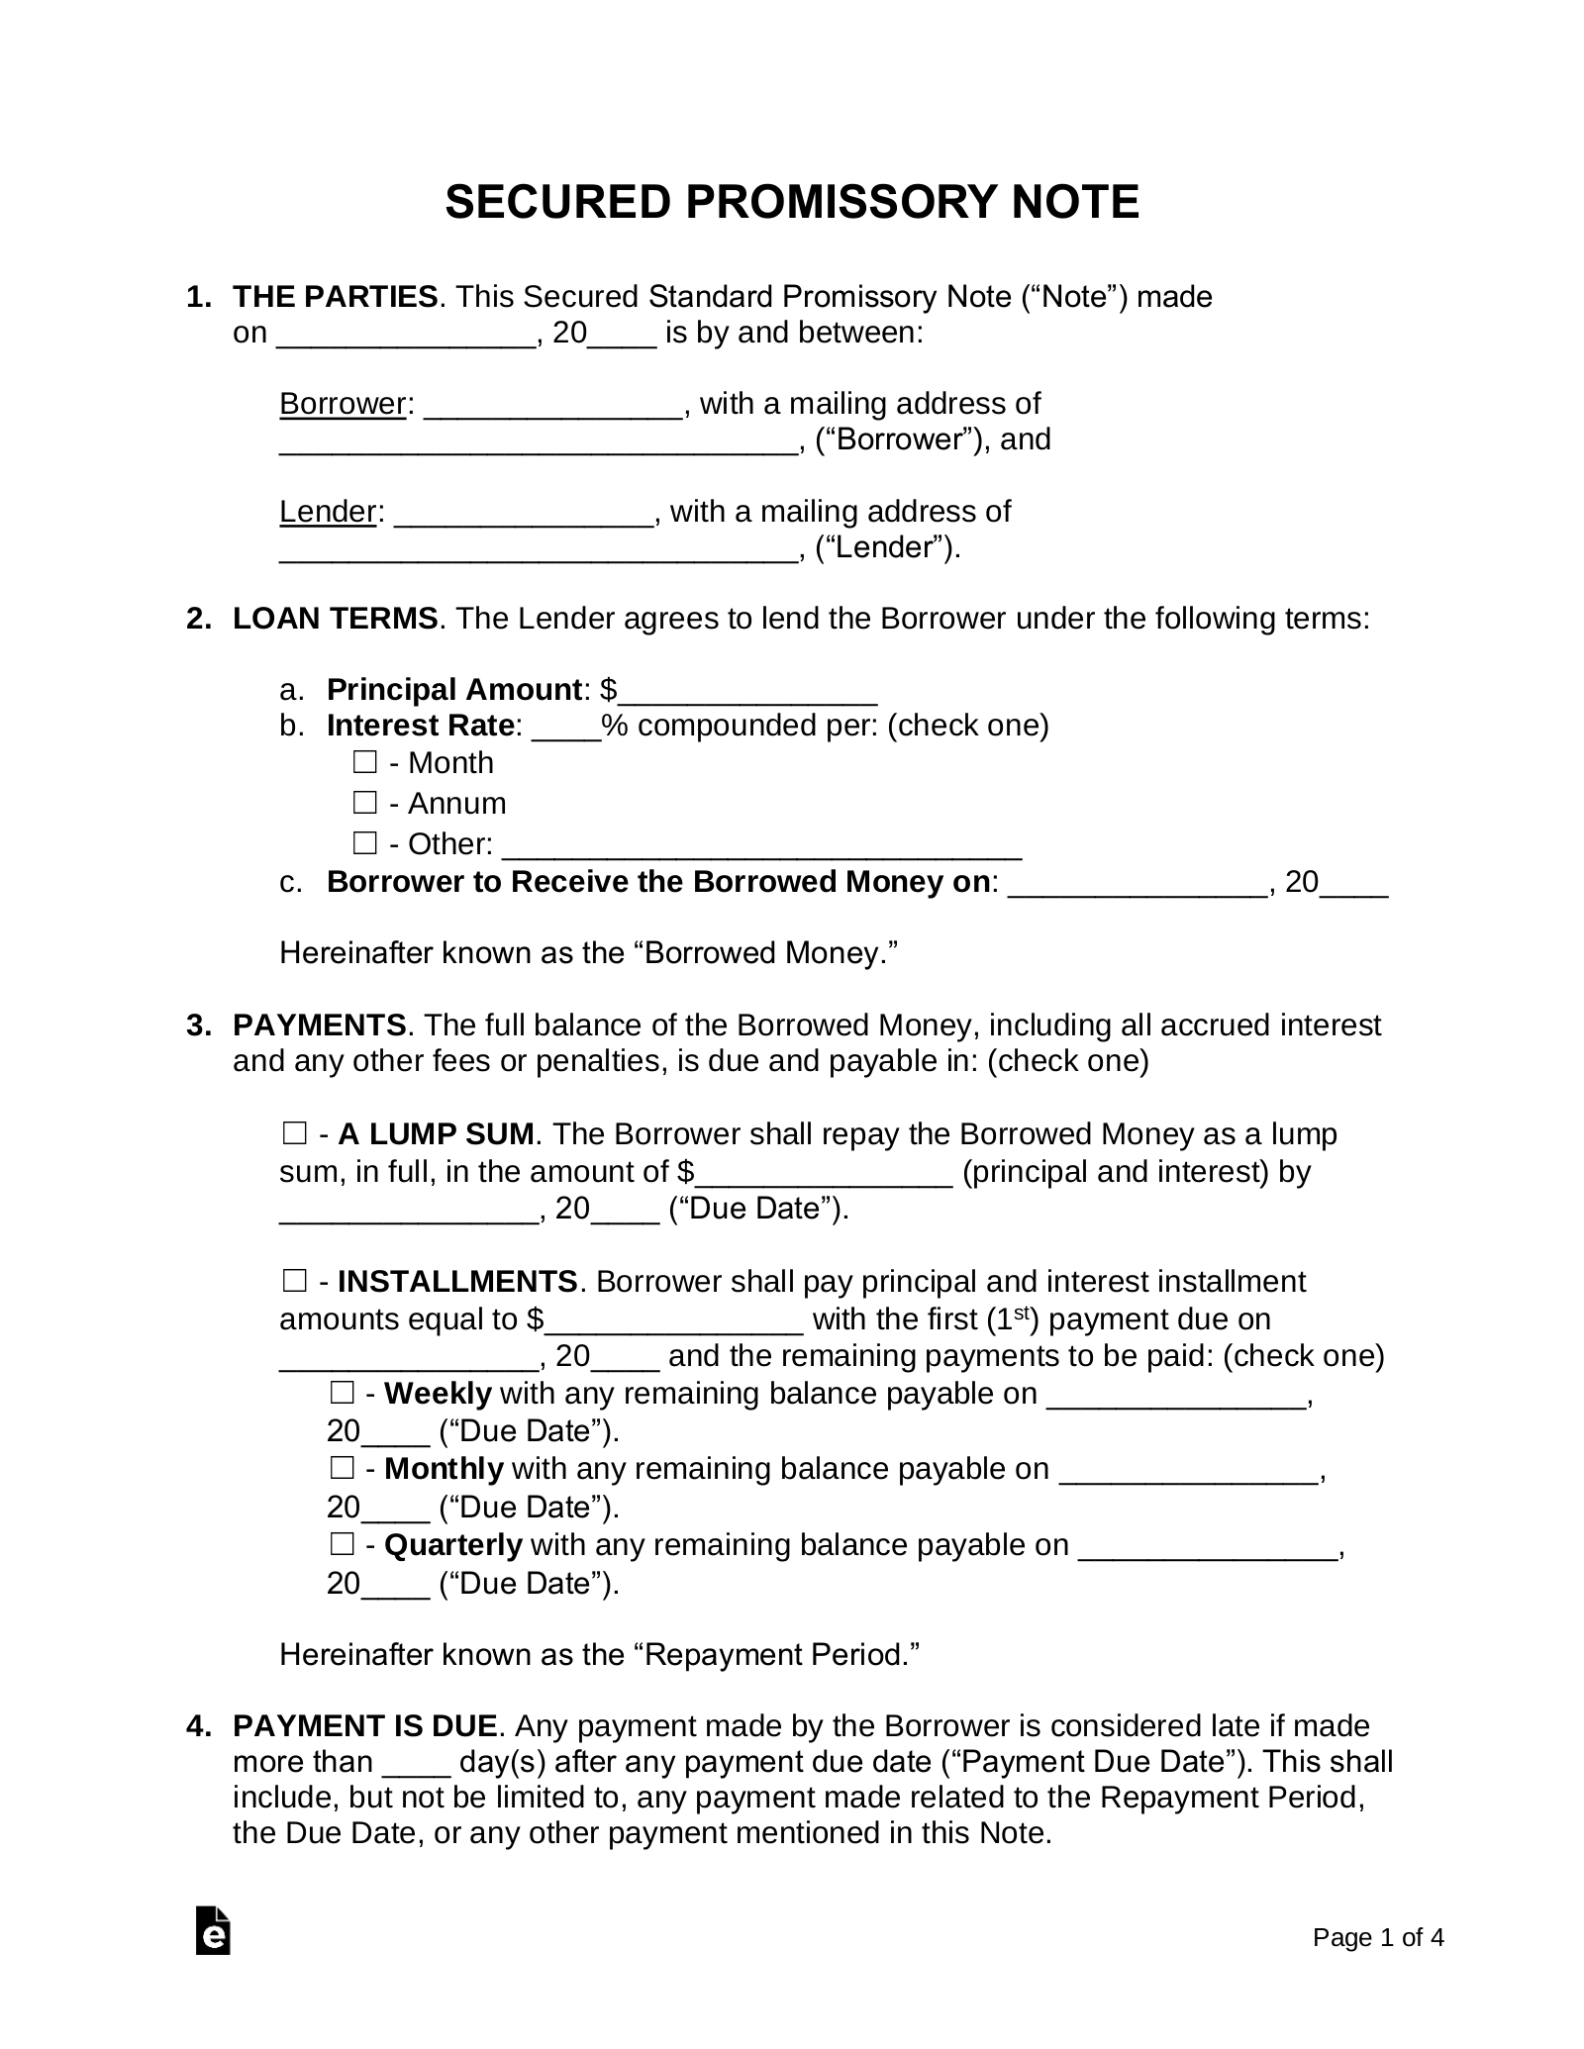 Free Secured Promissory Note Template - Word | Pdf - Eforms intended for Promissary Note Template